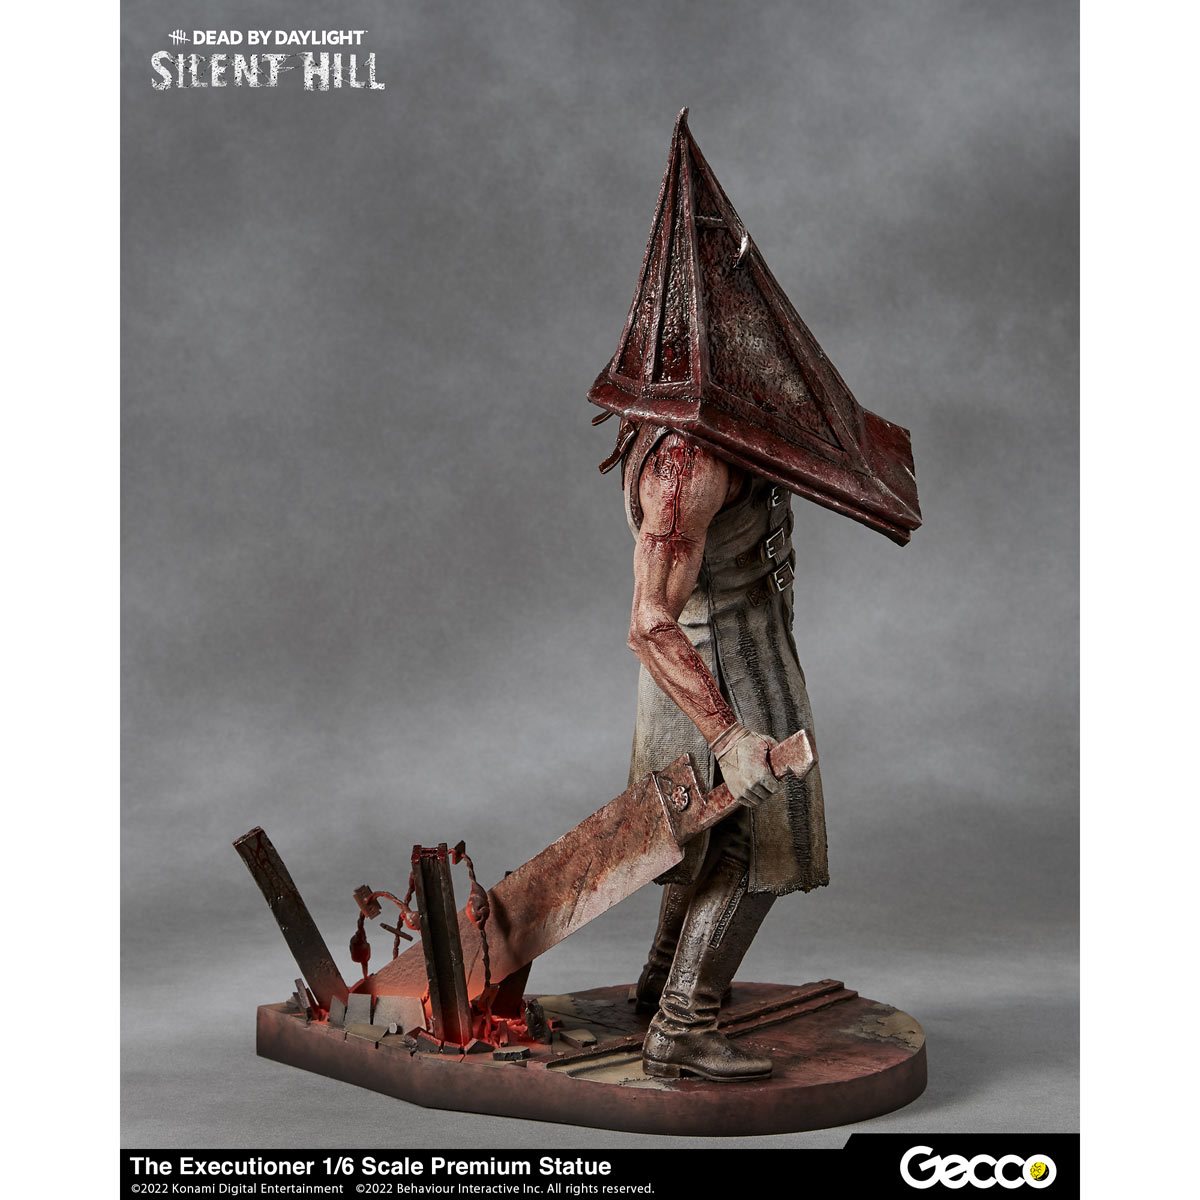 Dead by Daylight, Pyramid Head, Silent Hill, Chapter 16